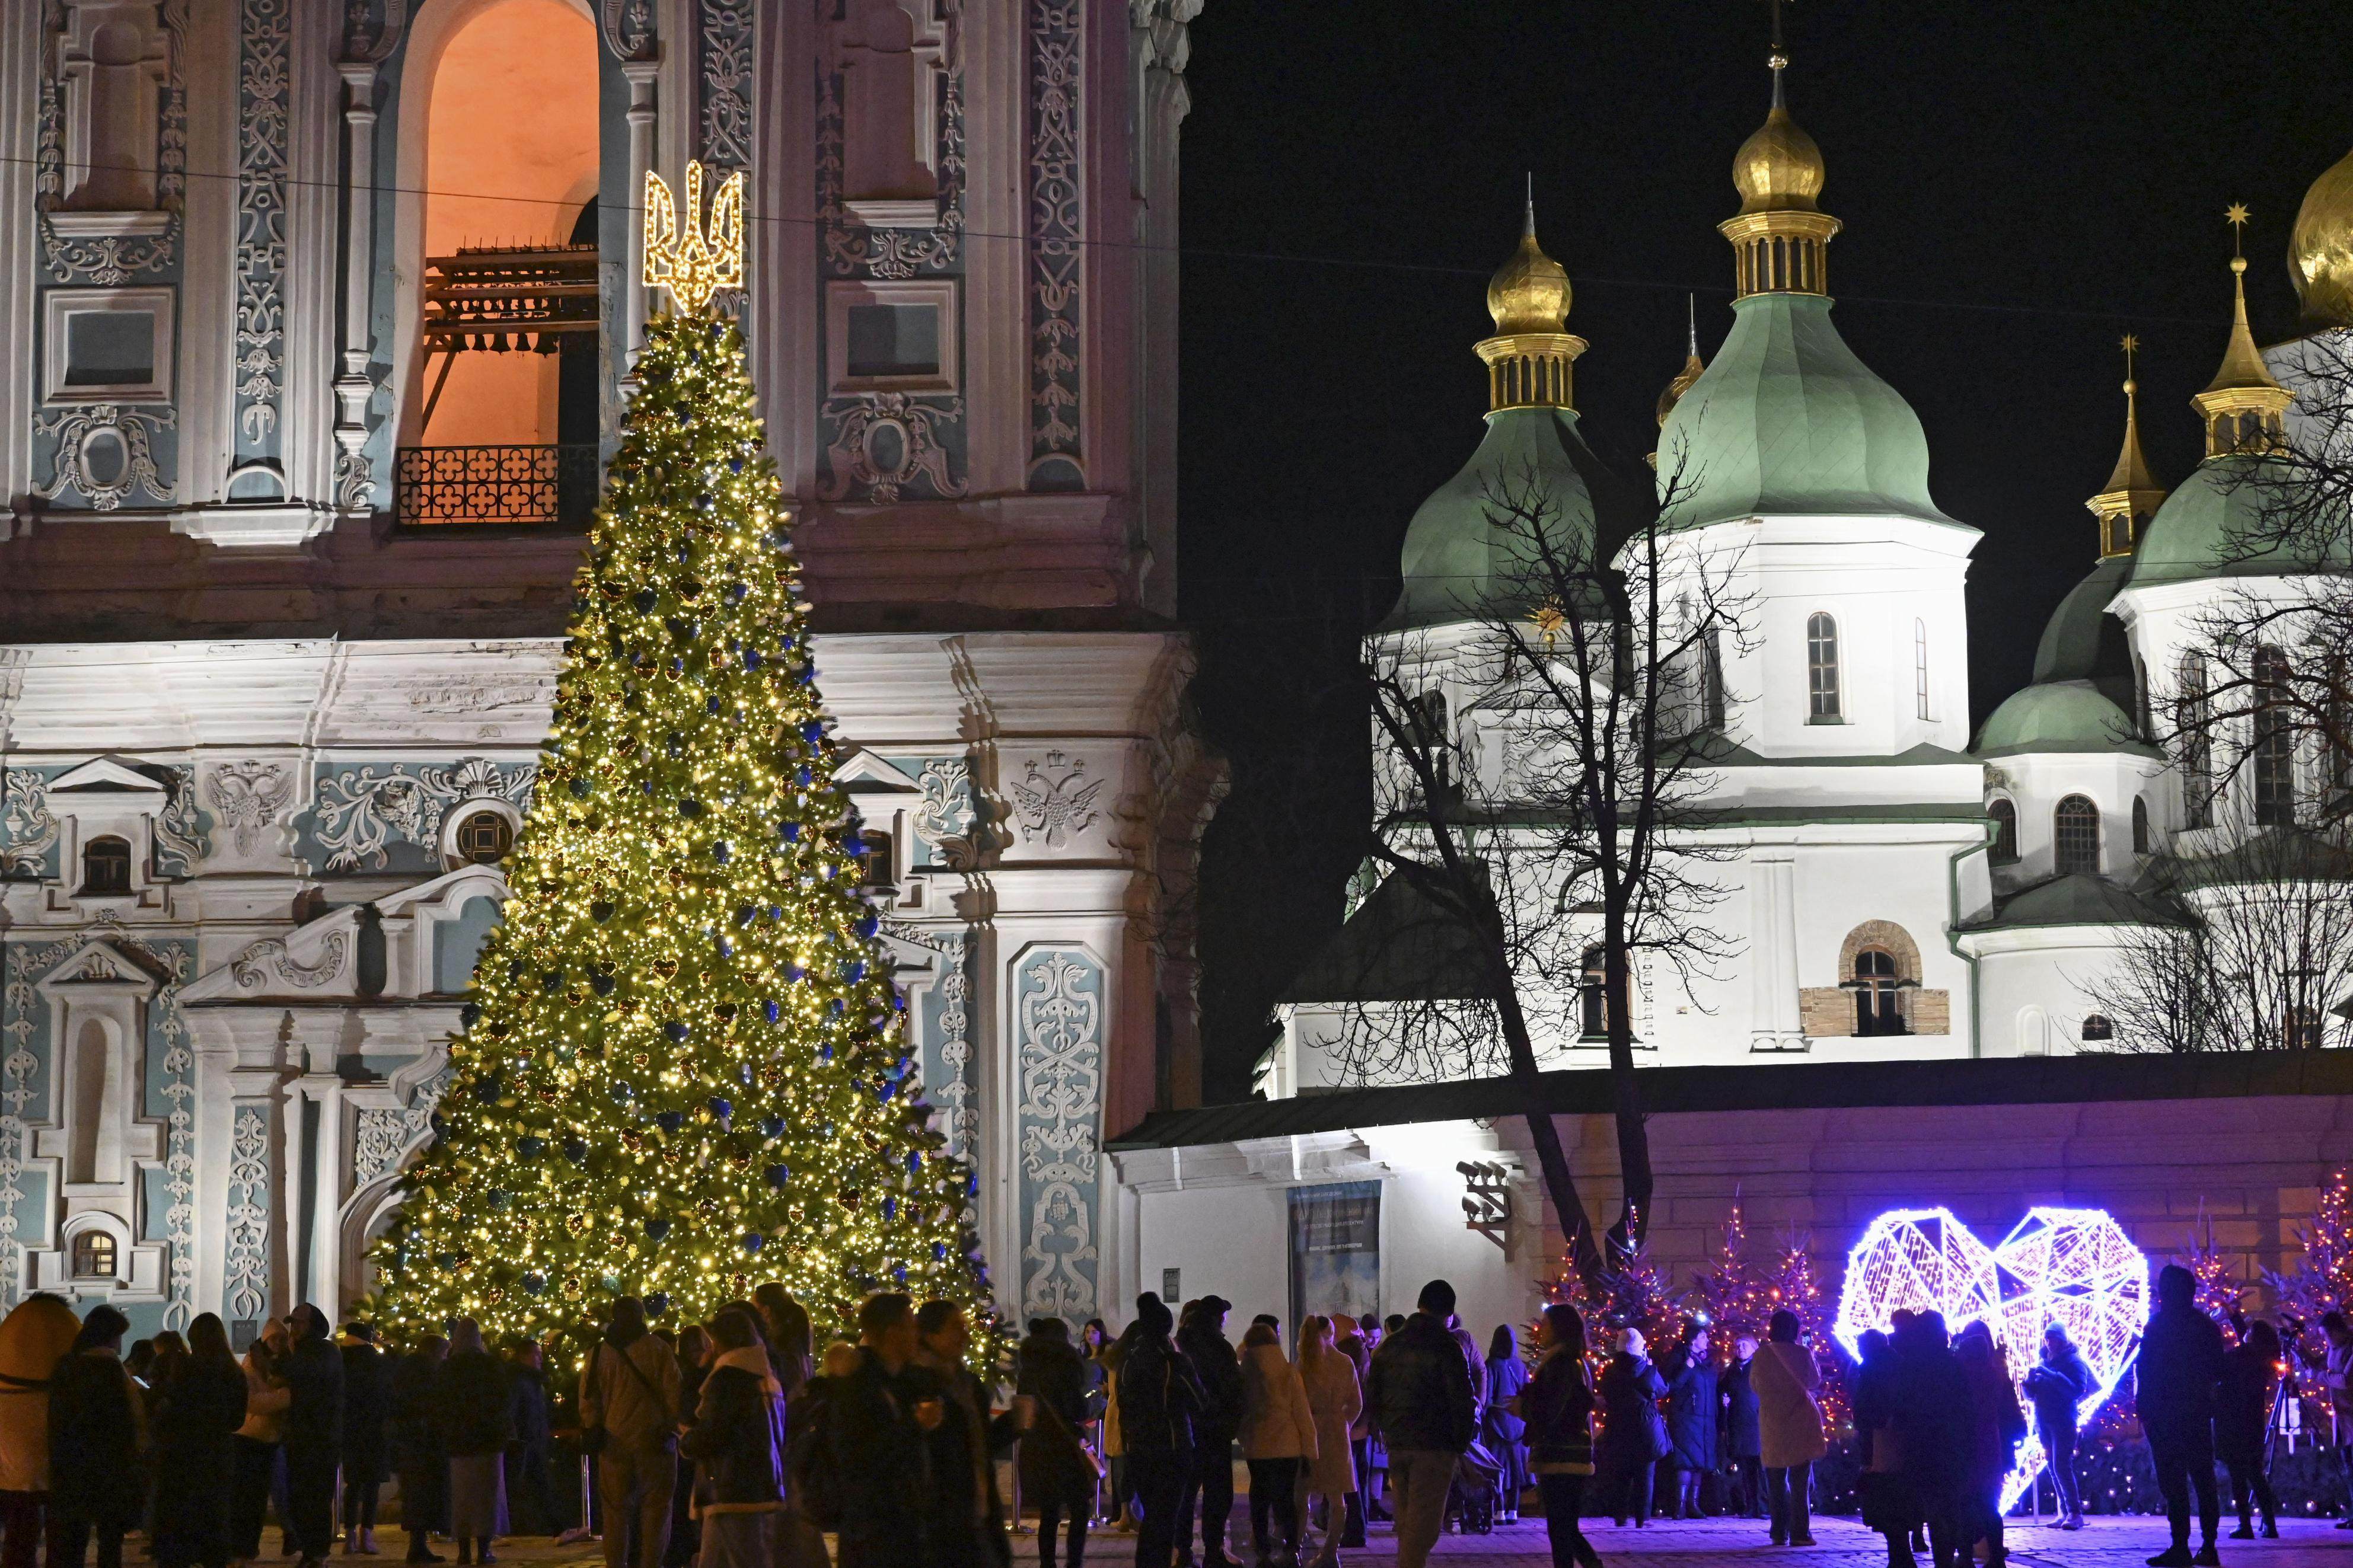 People gather around a giant Christmas tree in front of Saint Sophia Cathedral in Kyiv on last Wednesday. Photo: Kyodo